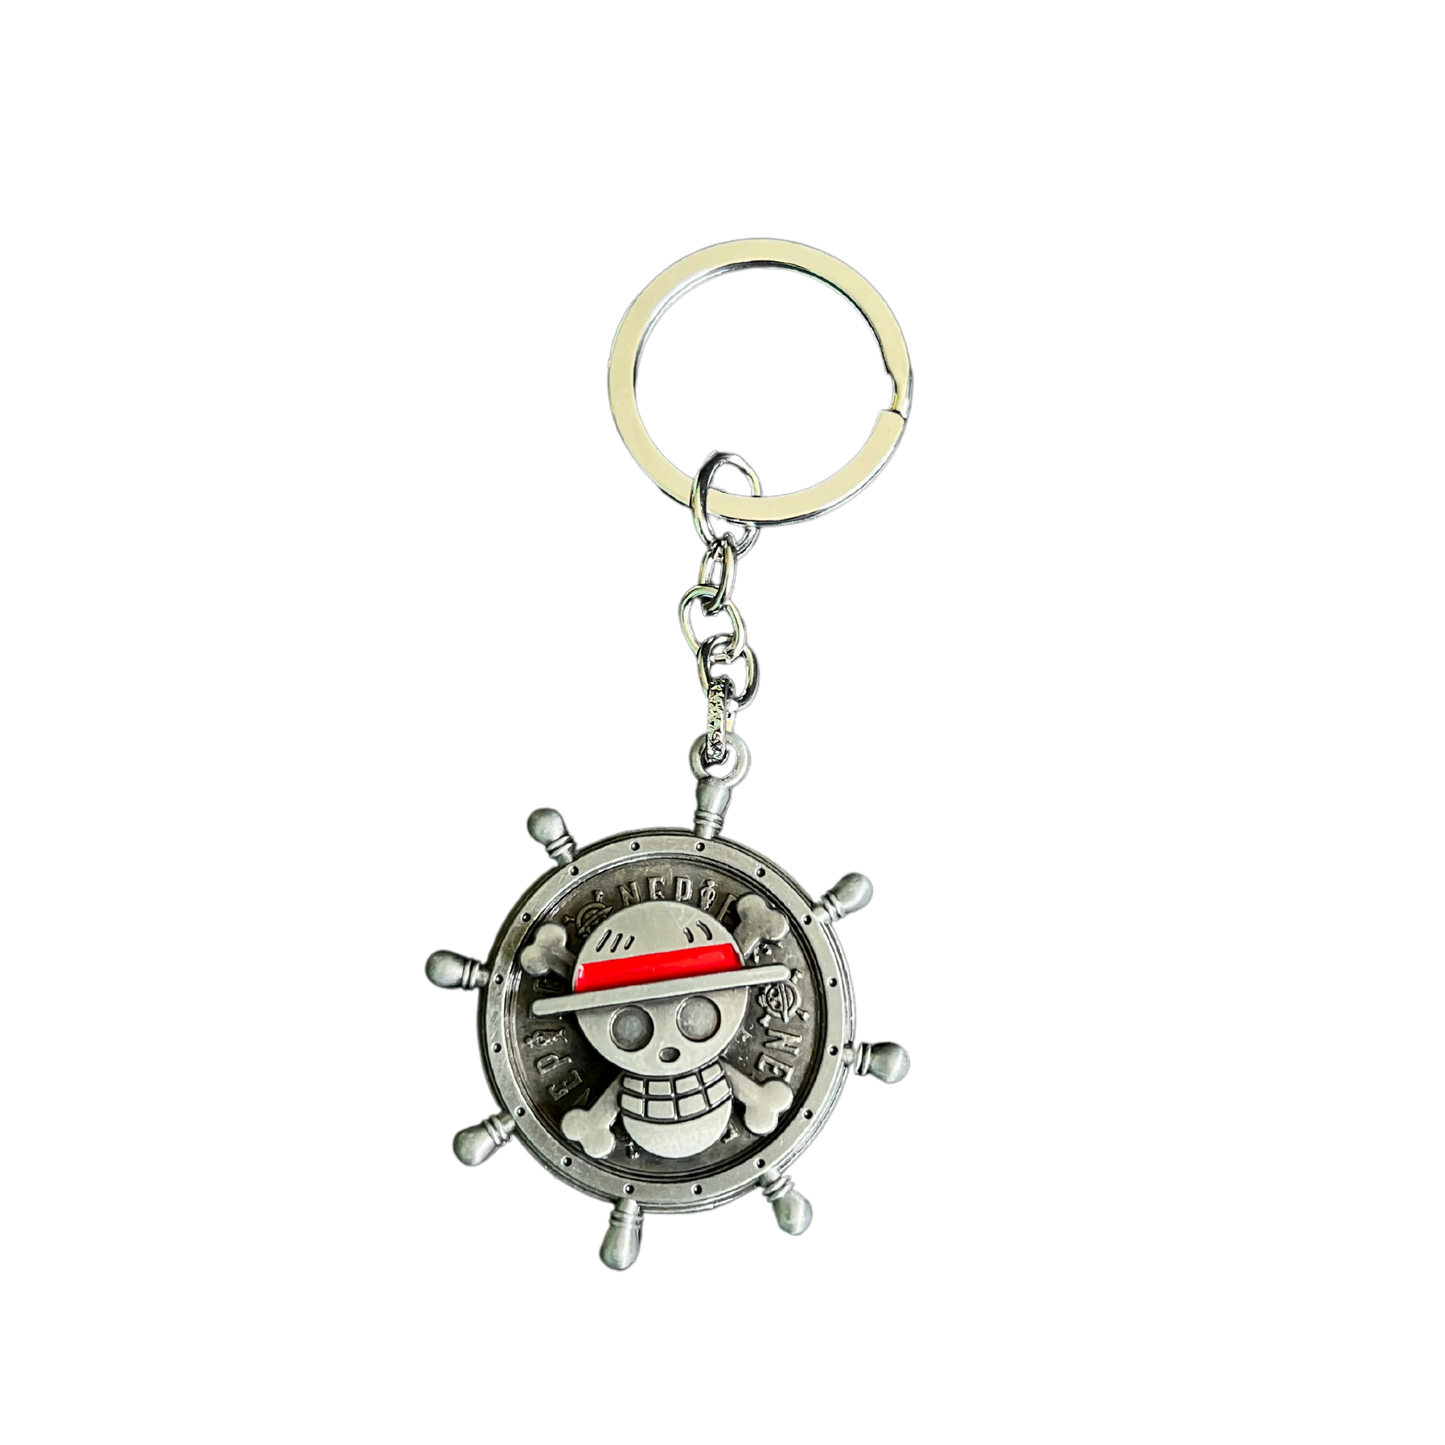 Spinning Pirate King Keychain